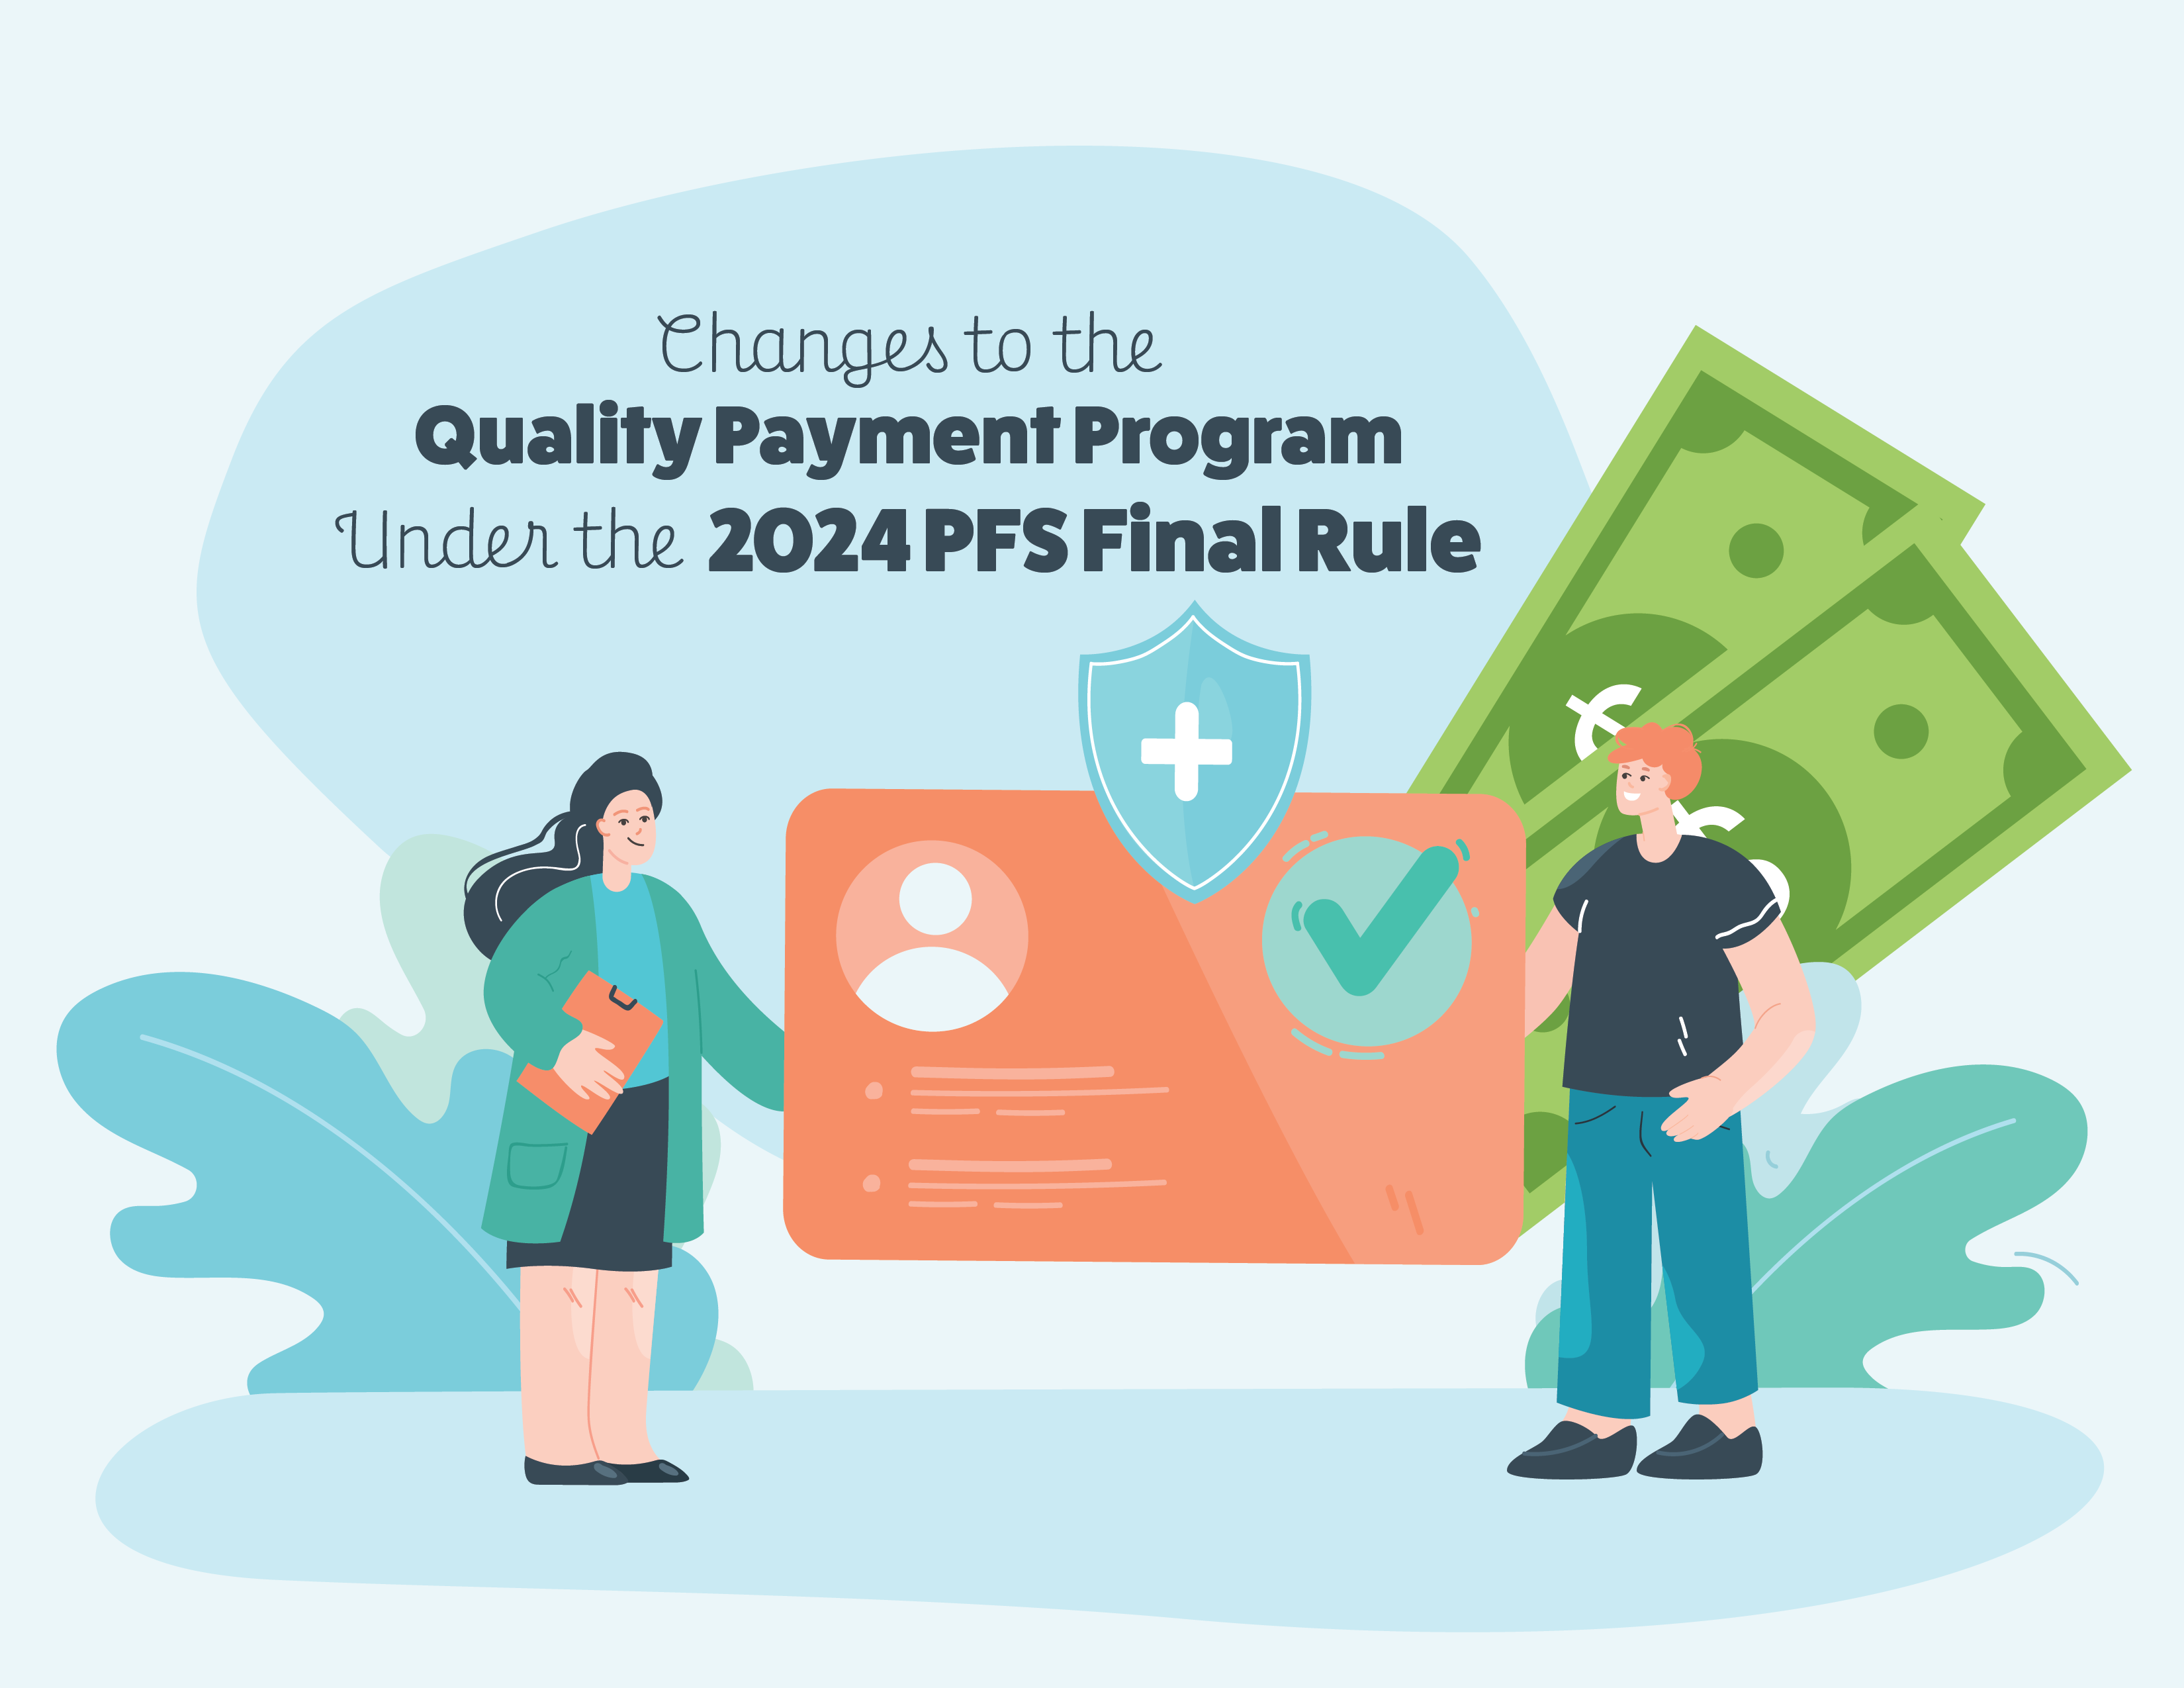 Changes to the Quality Payment Program under the 2024 PFS Final Rule